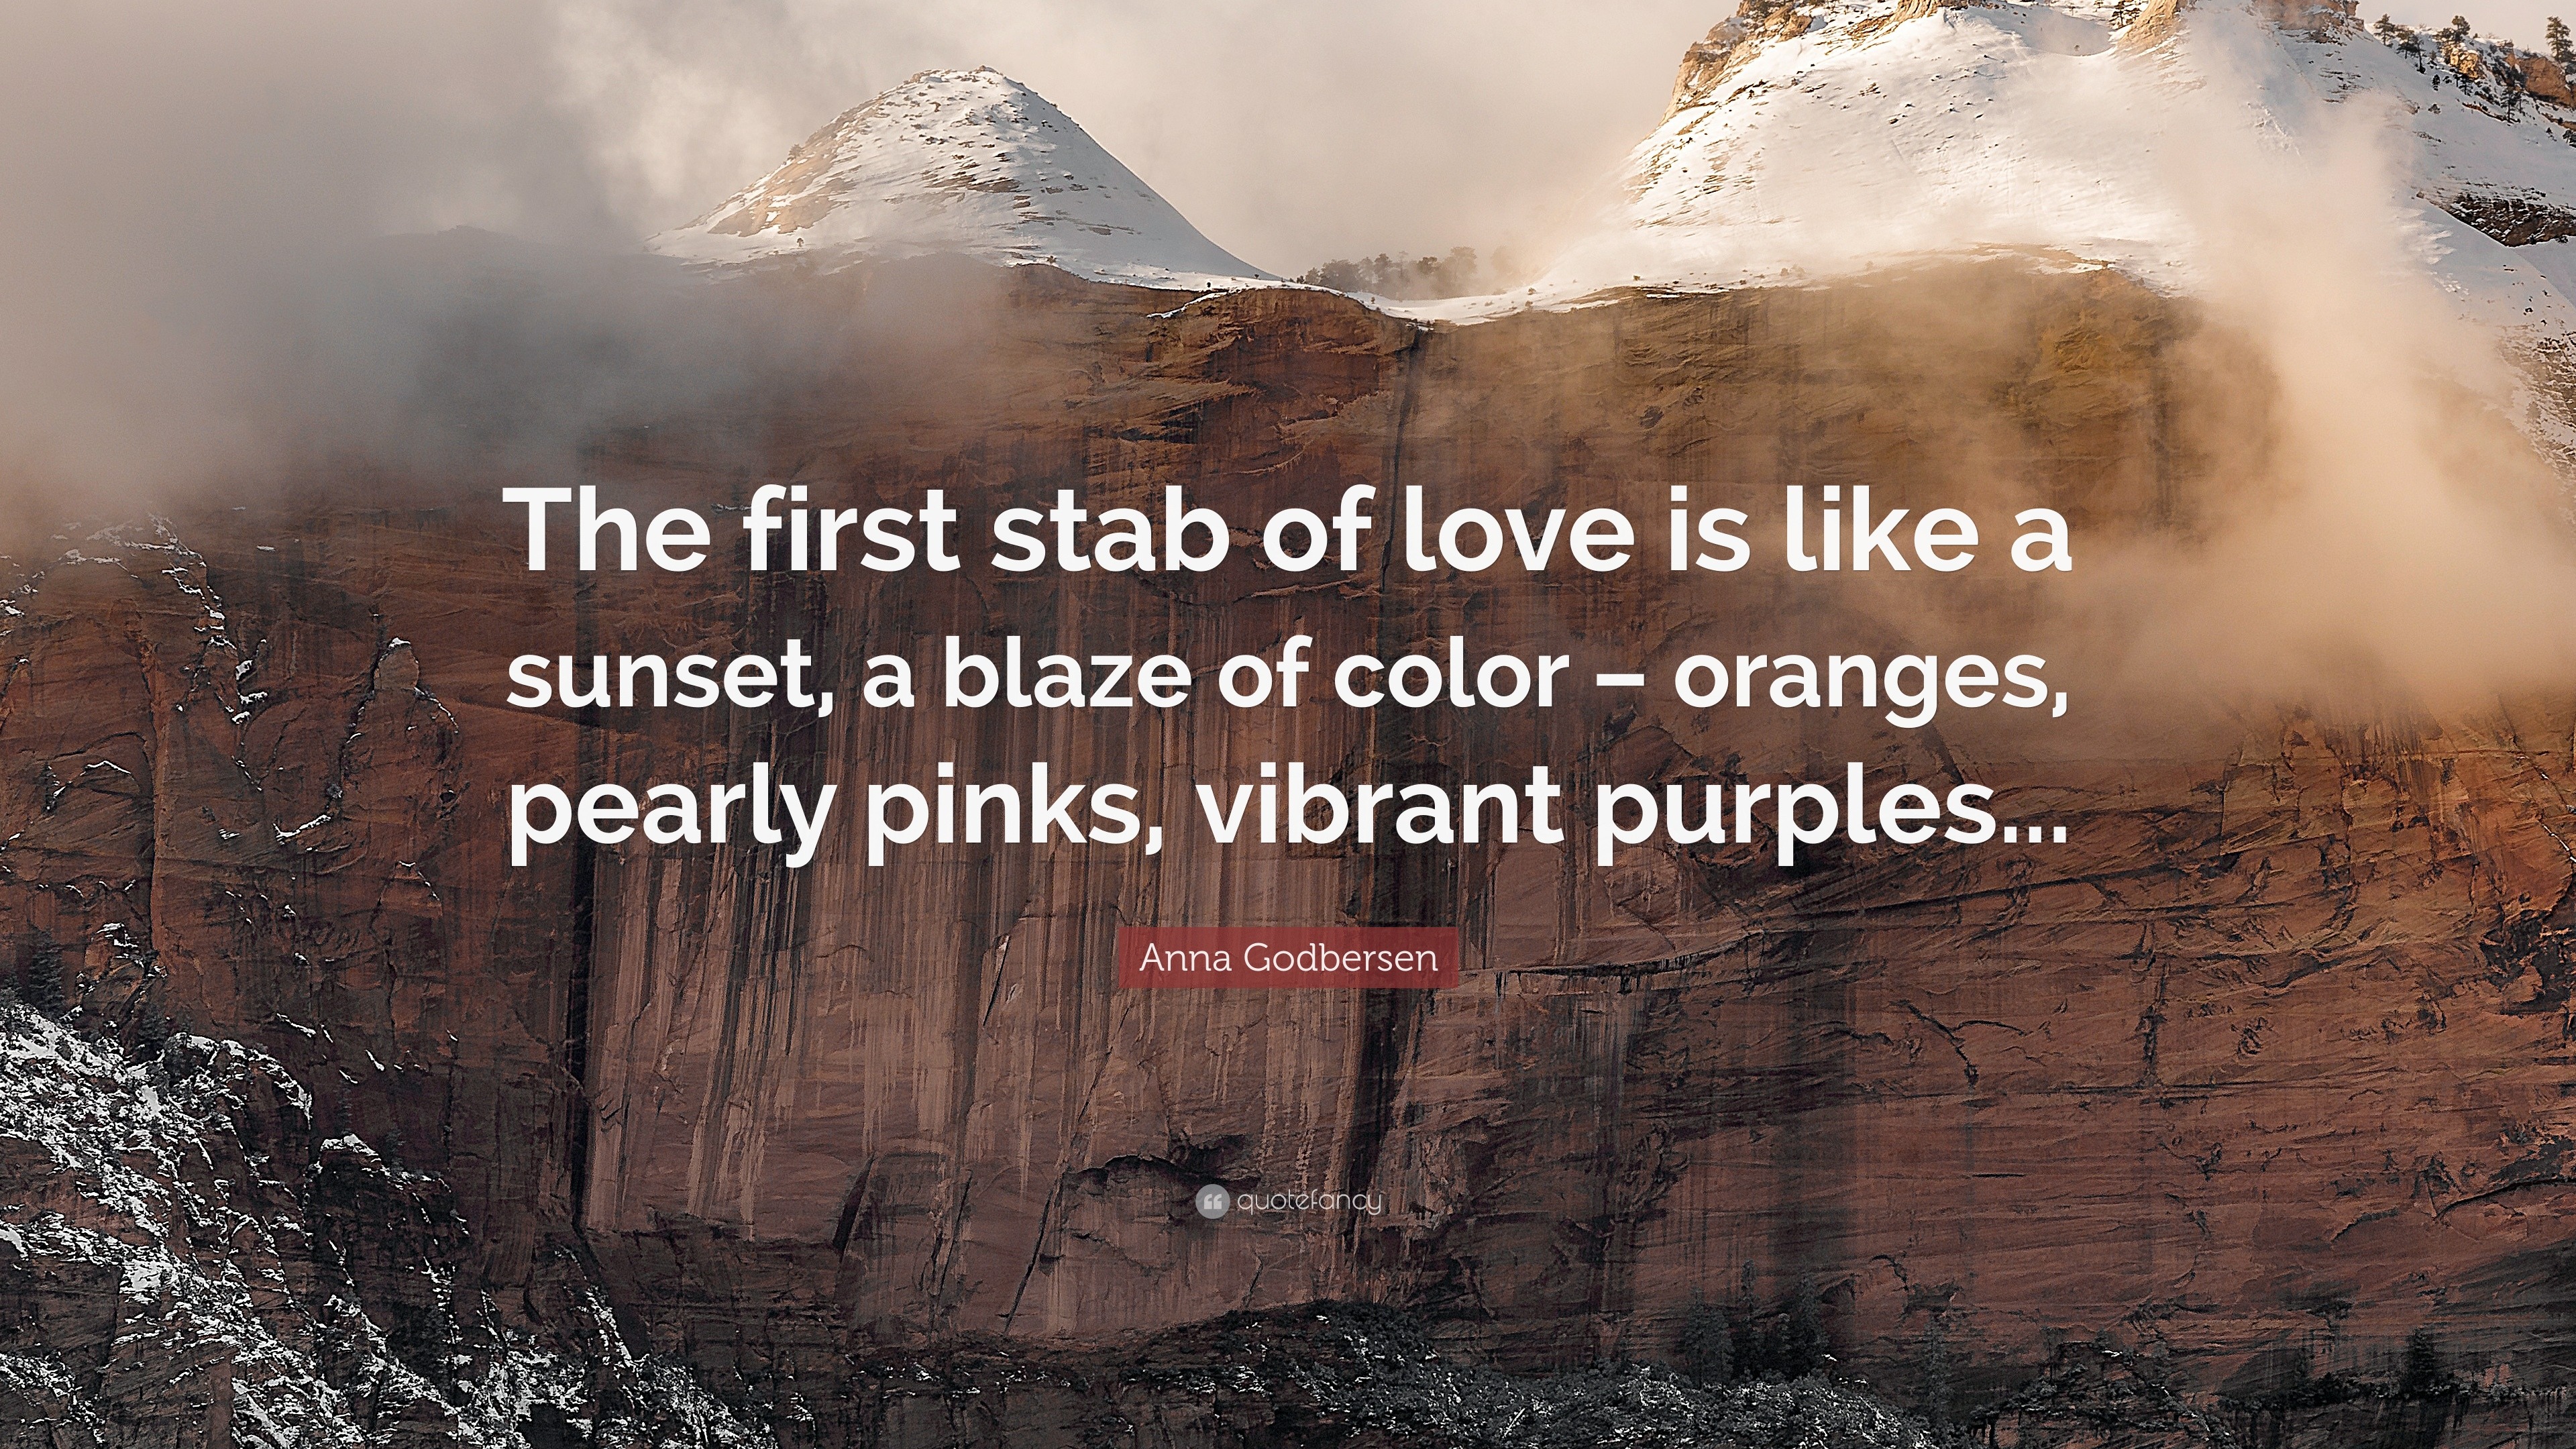 Anna Godbersen Quote: “The first stab of love is like a sunset, a blaze ...